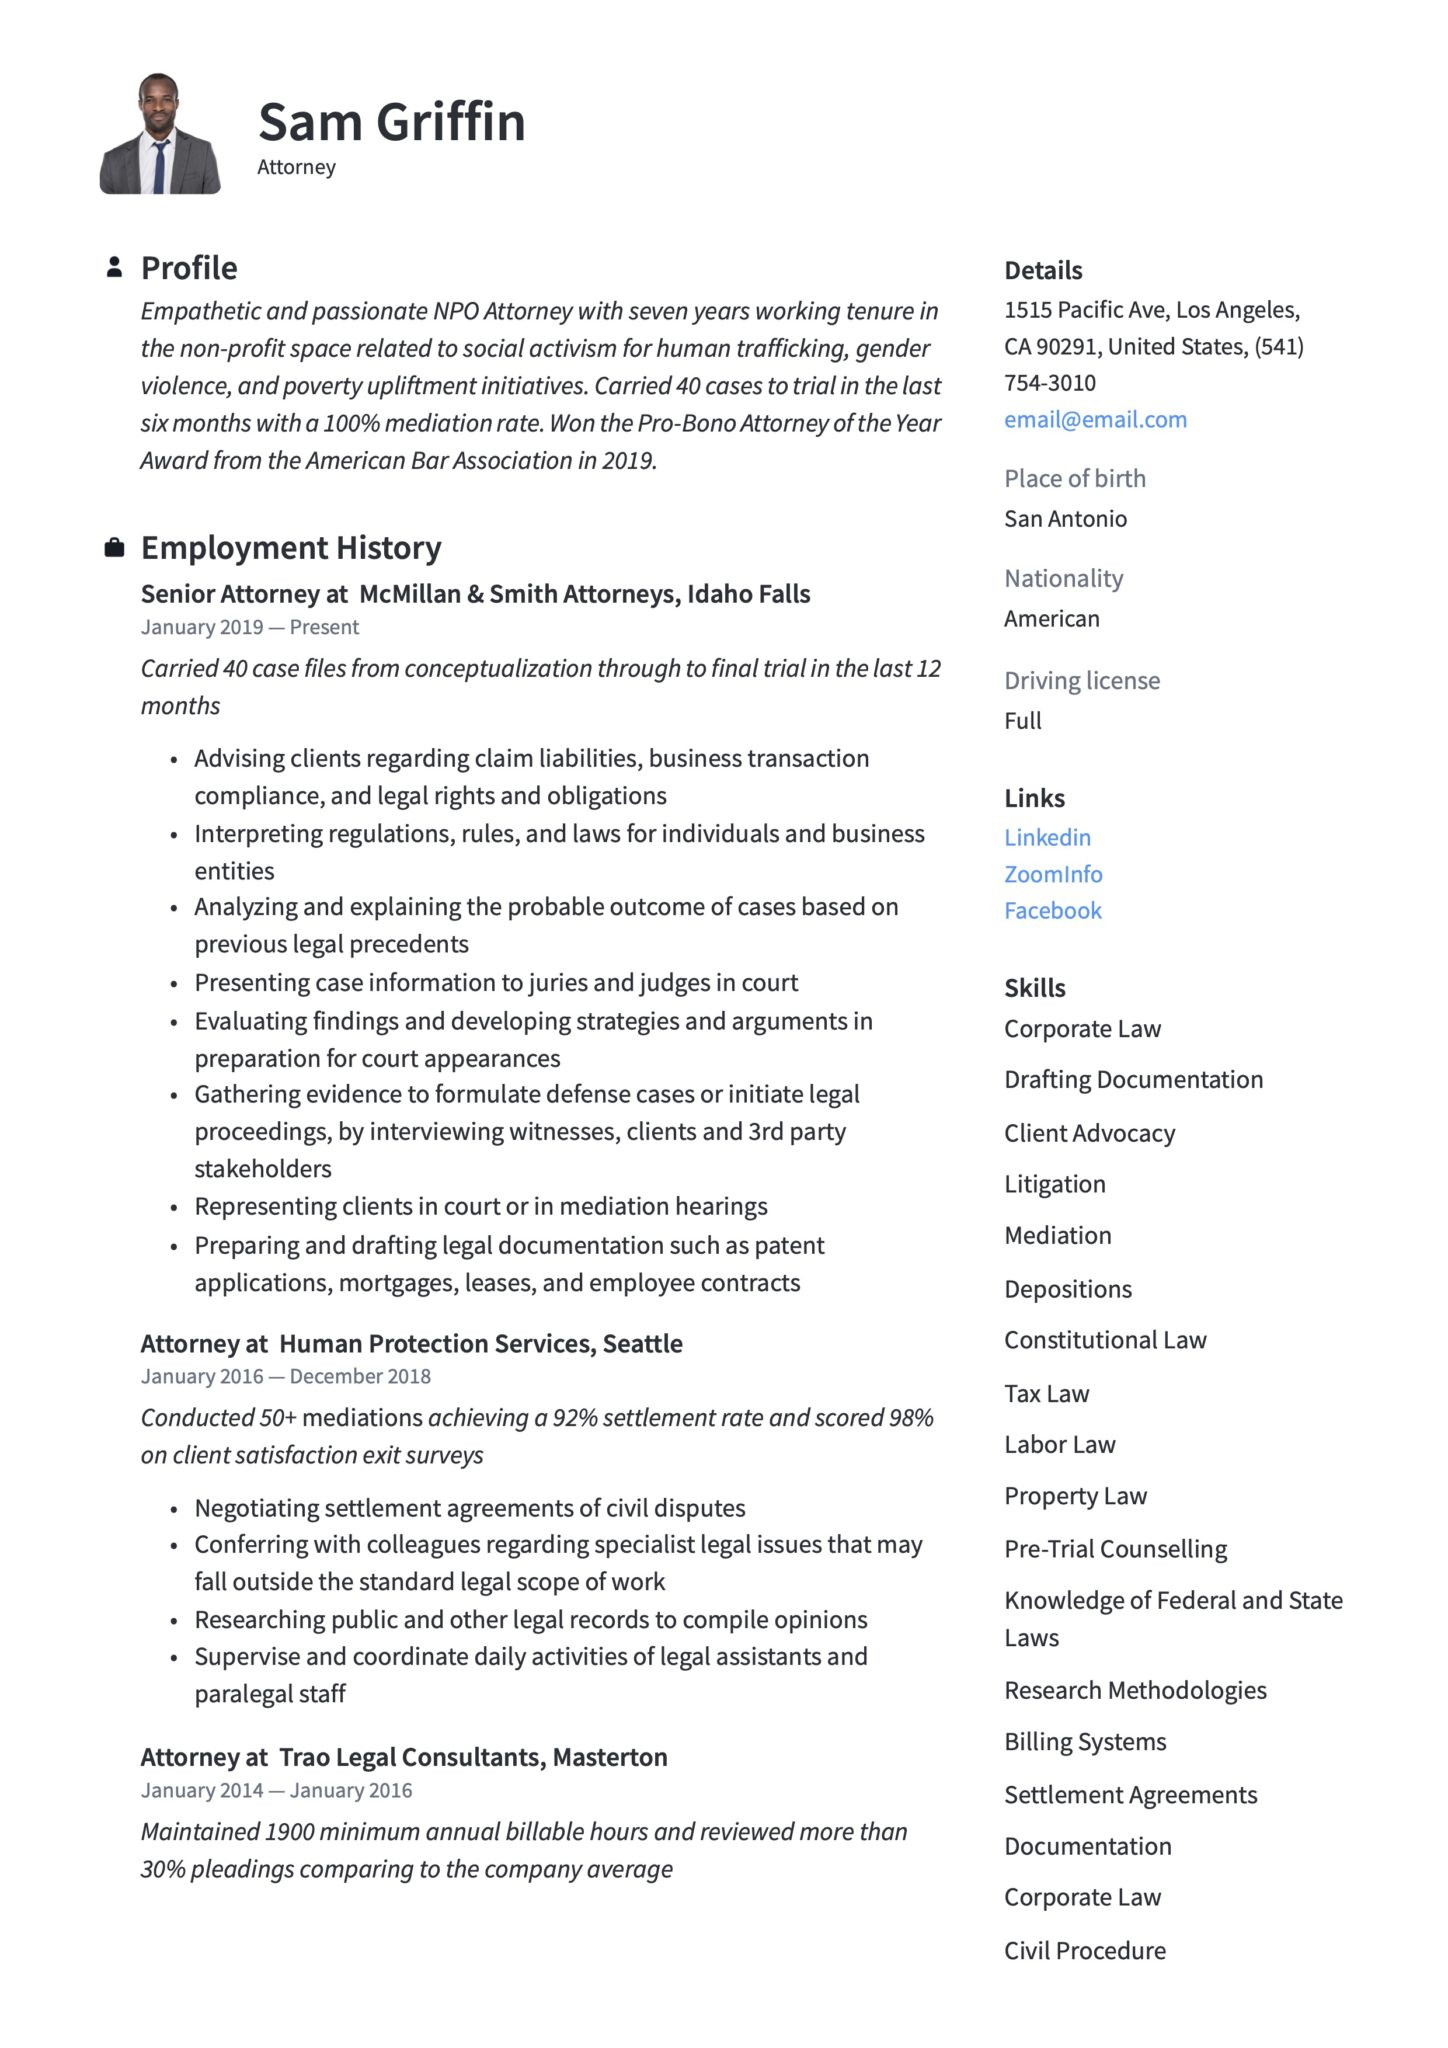 Sample Resume for Law Firm Partner 18 attorney Resume Examples & Writing Guide Templates 2022